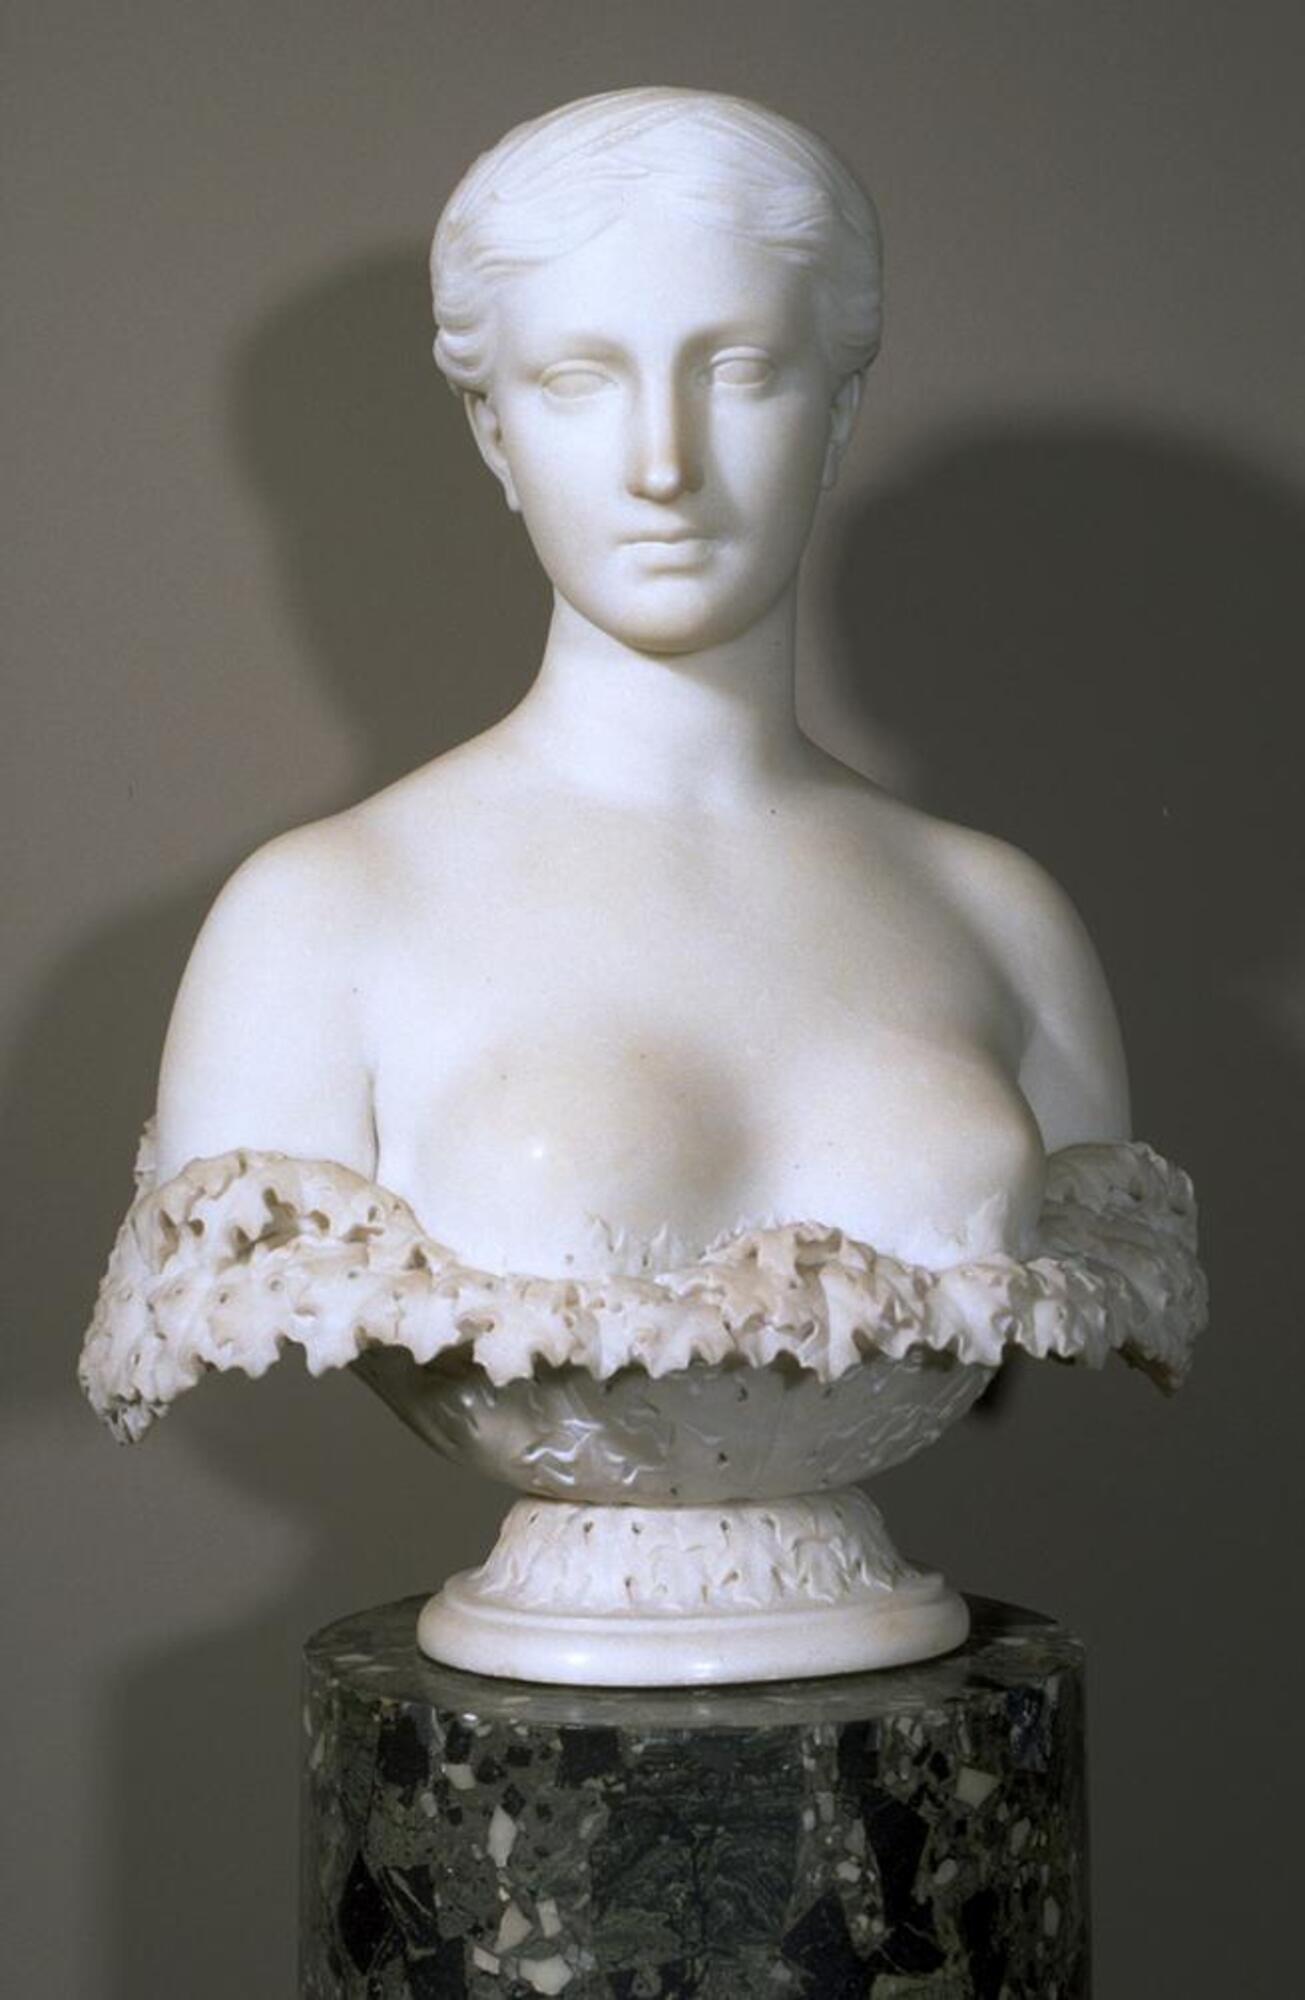 Bust-length white marble sculpture of a young female figure crowned with a plait of wheat and framed along the bottom with a wreath of sculpted acanthus leaves.